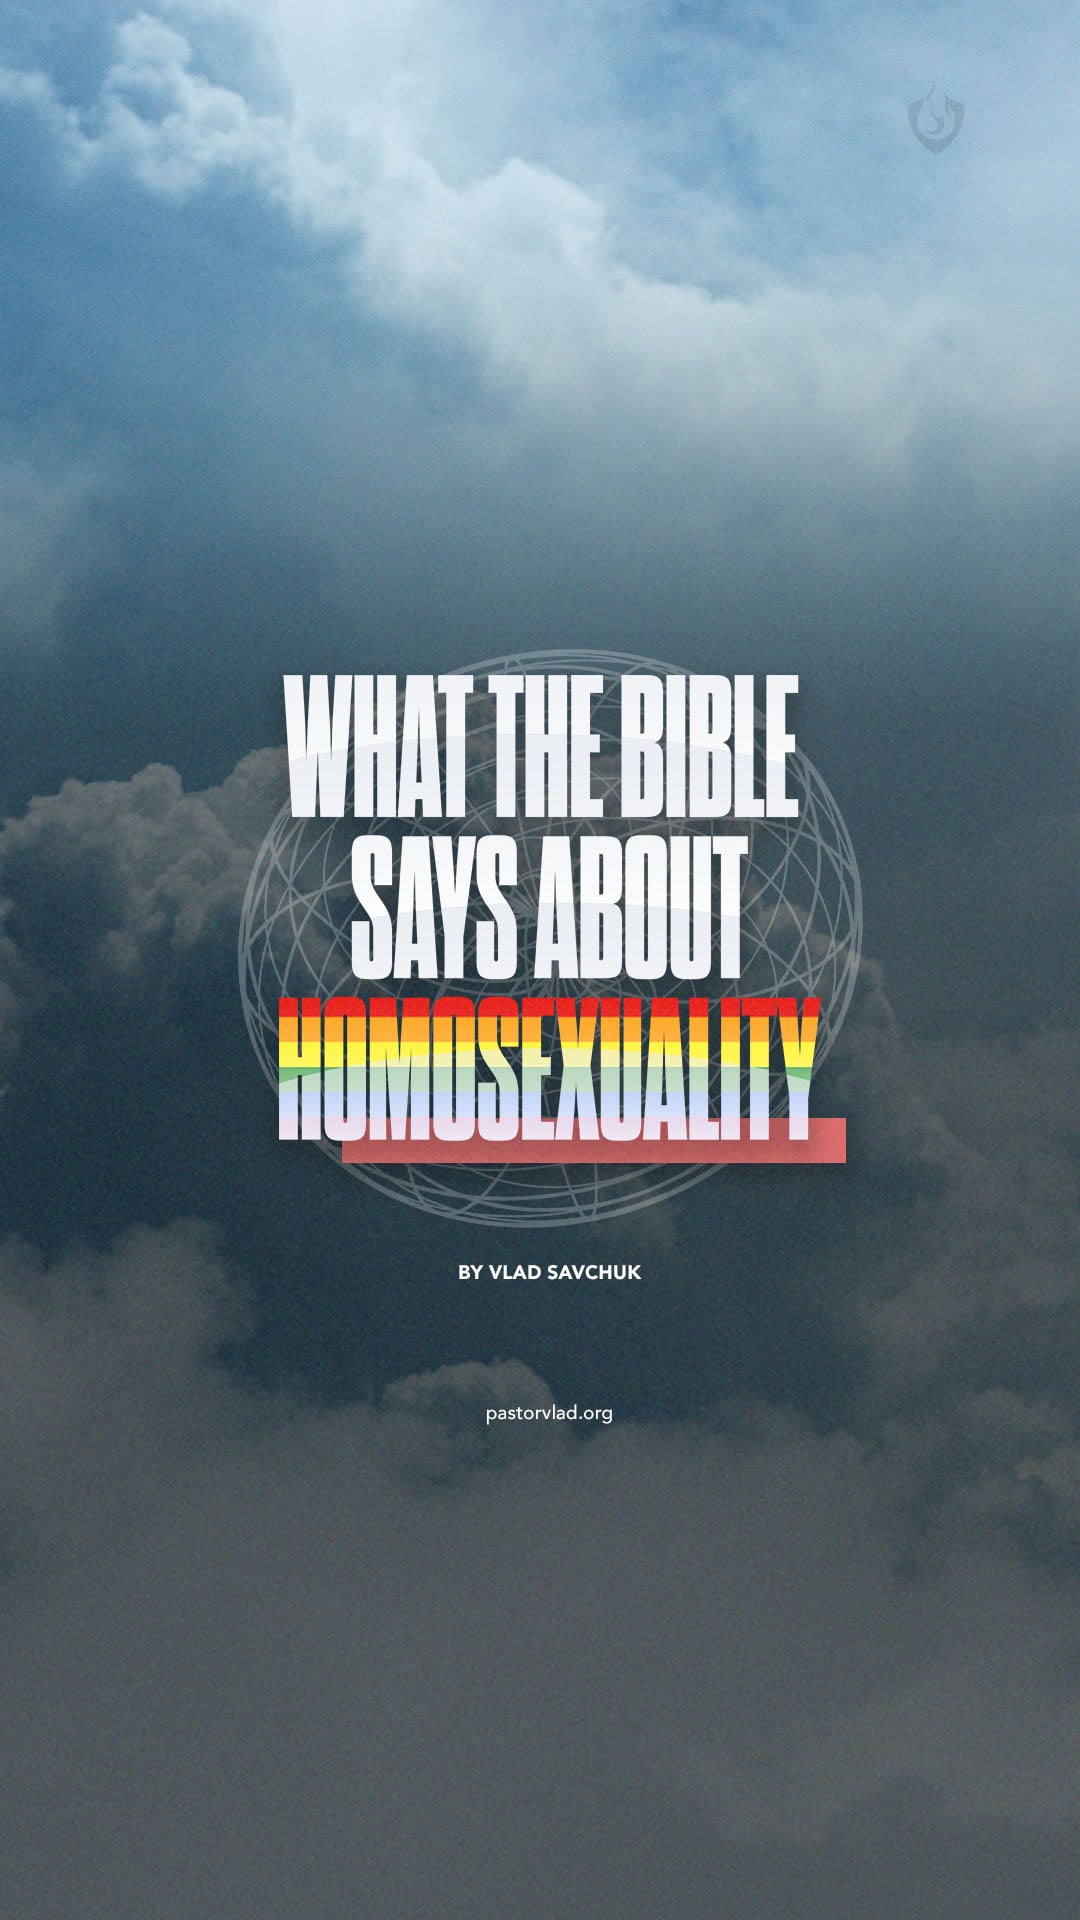 Featured Image for “What the Bible Says About Homosexuality”